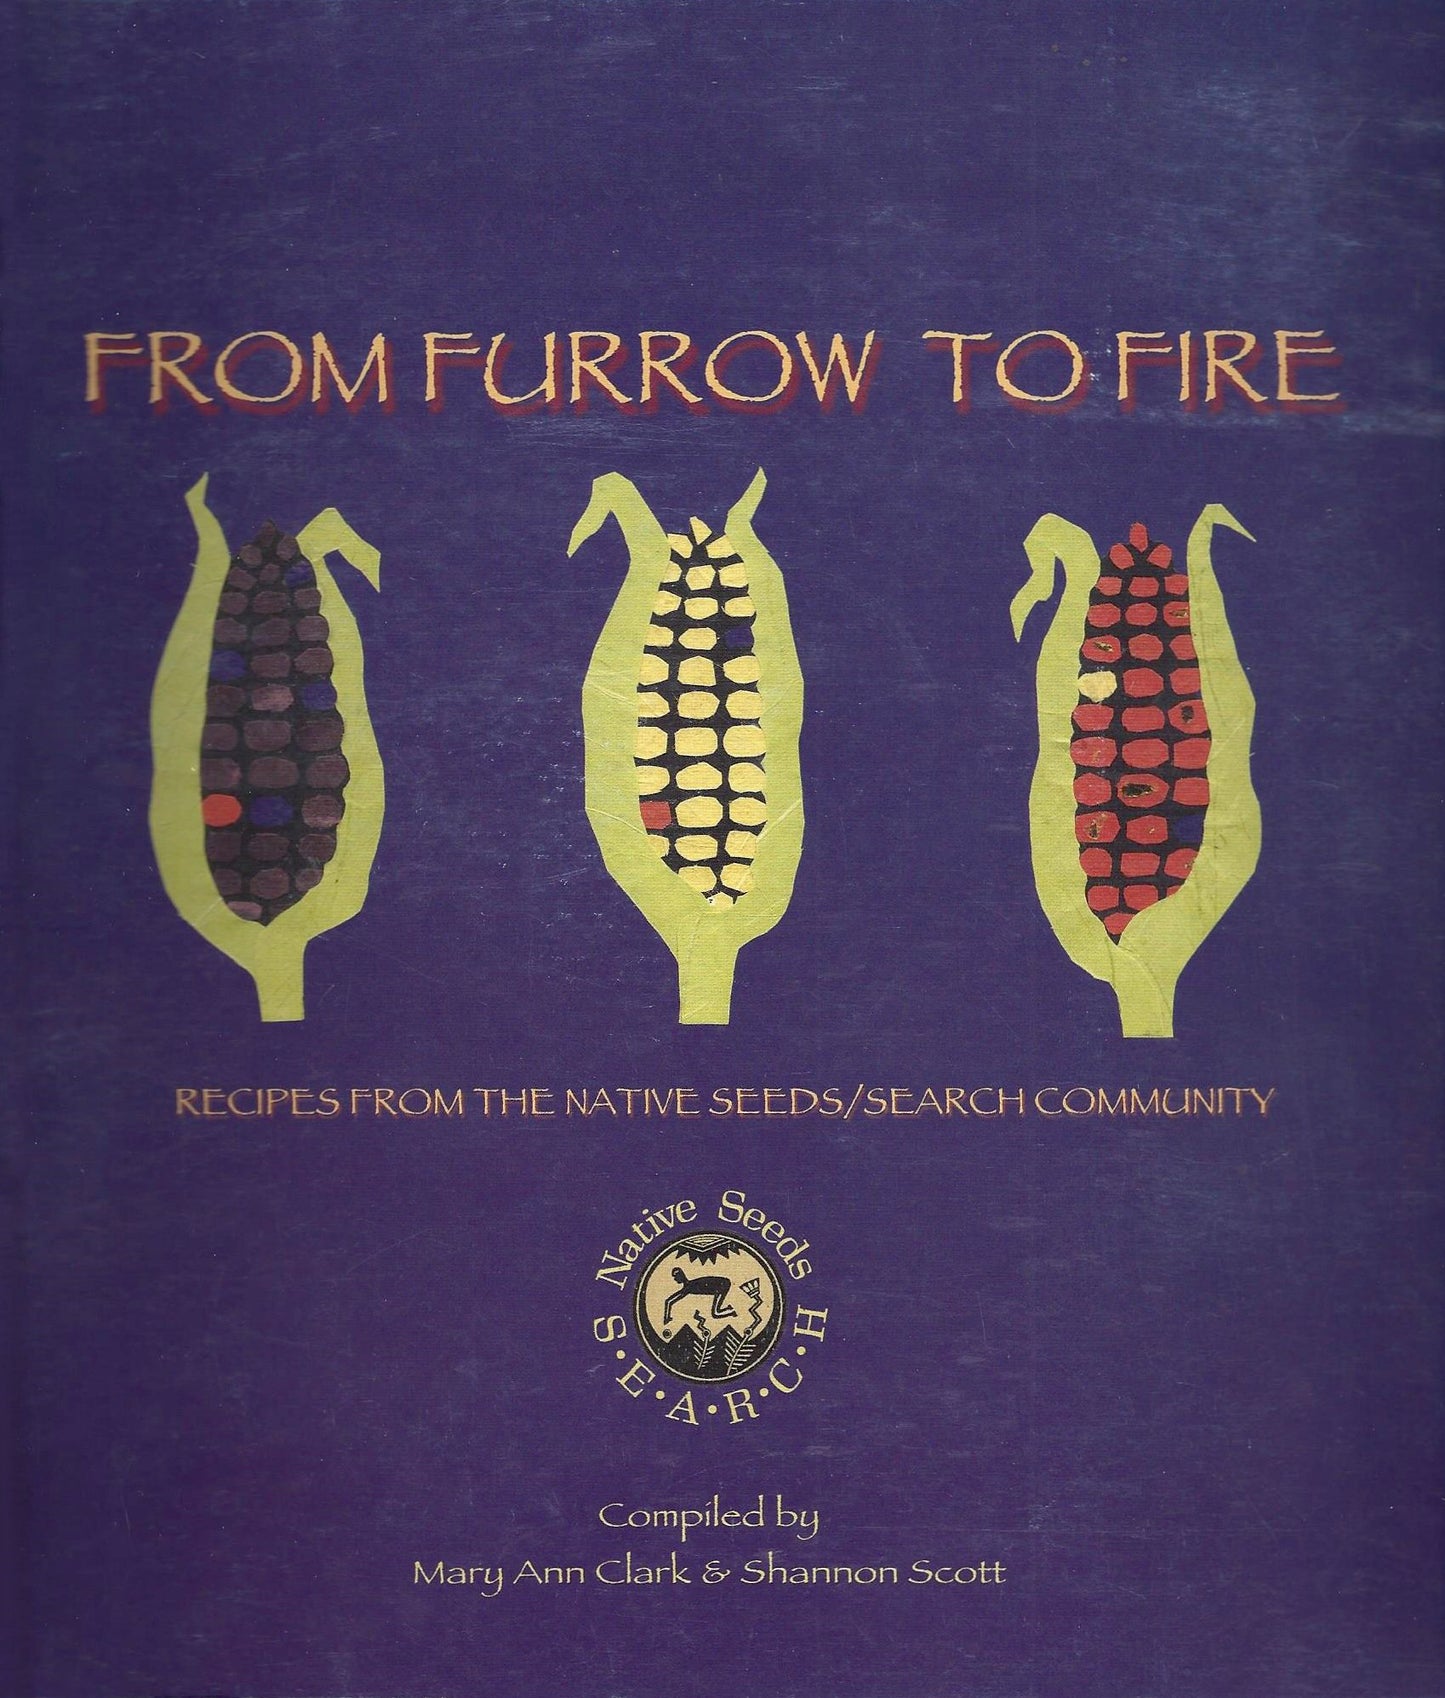 From Furrow To Fire - Native Seeds/SEARCH Recipes